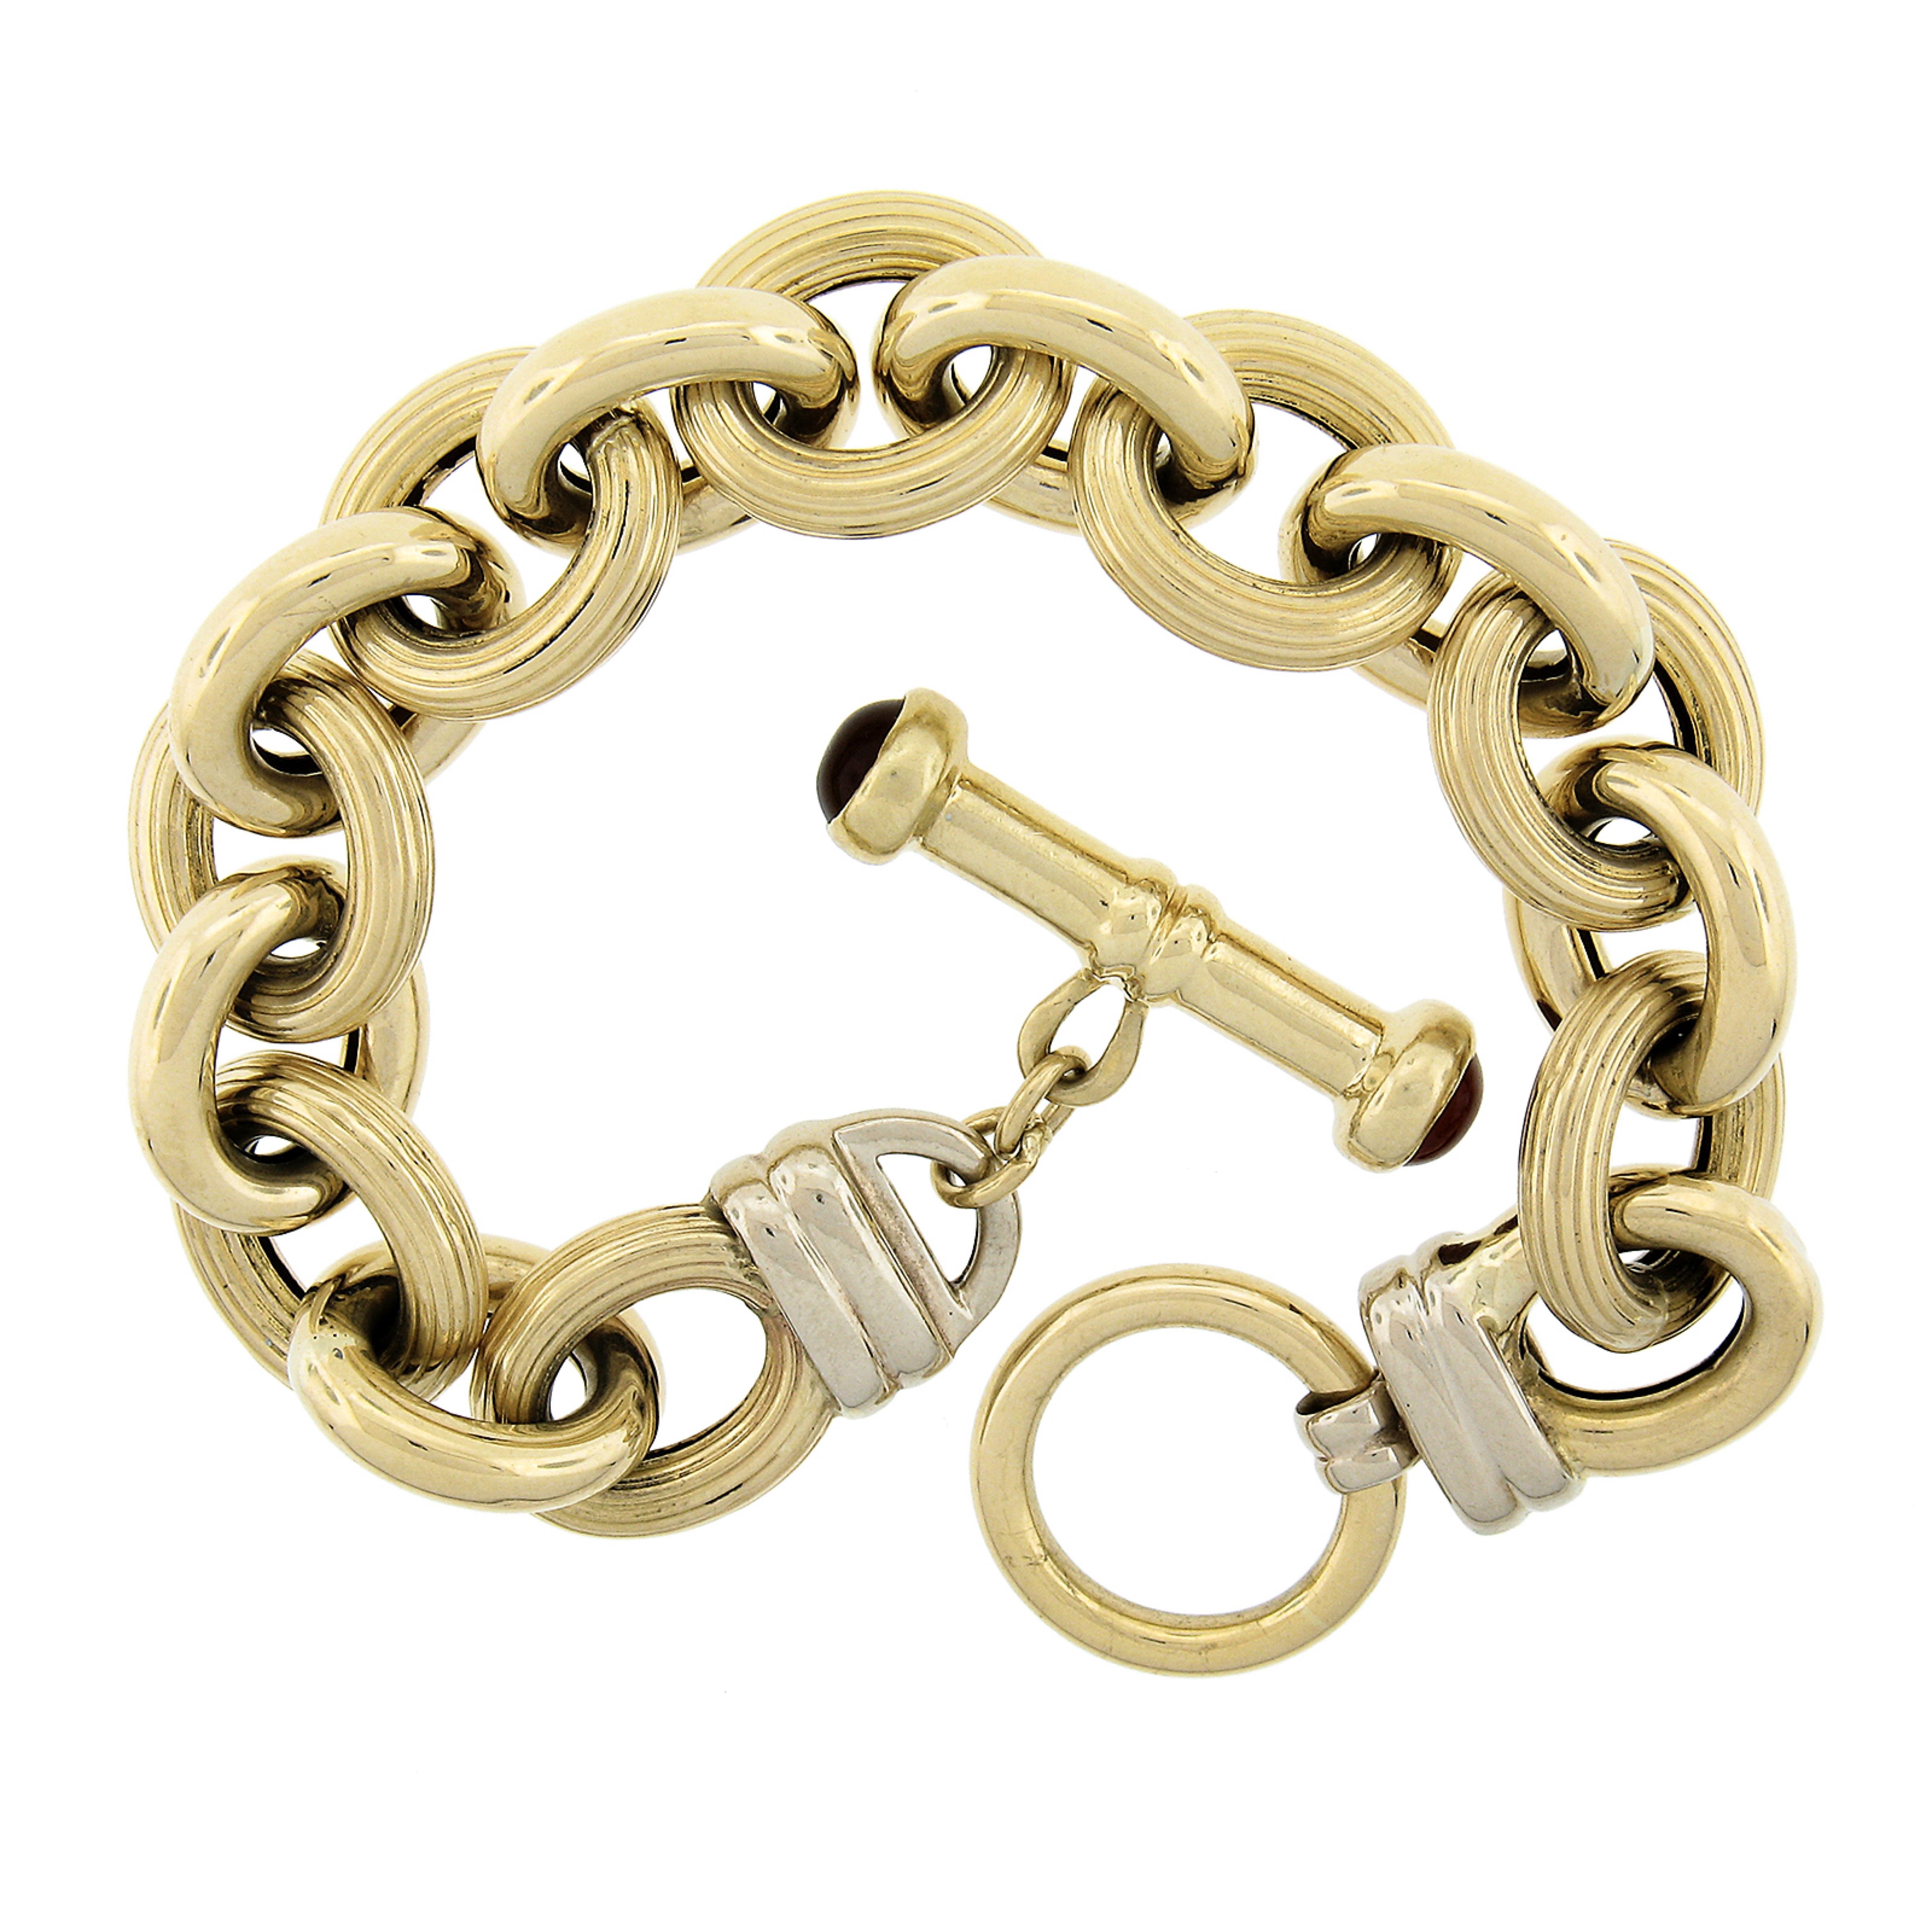 Cabochon 14k Gold Large Textured Polished Puffed Design Open Link Toggle Clasp Bracelet For Sale